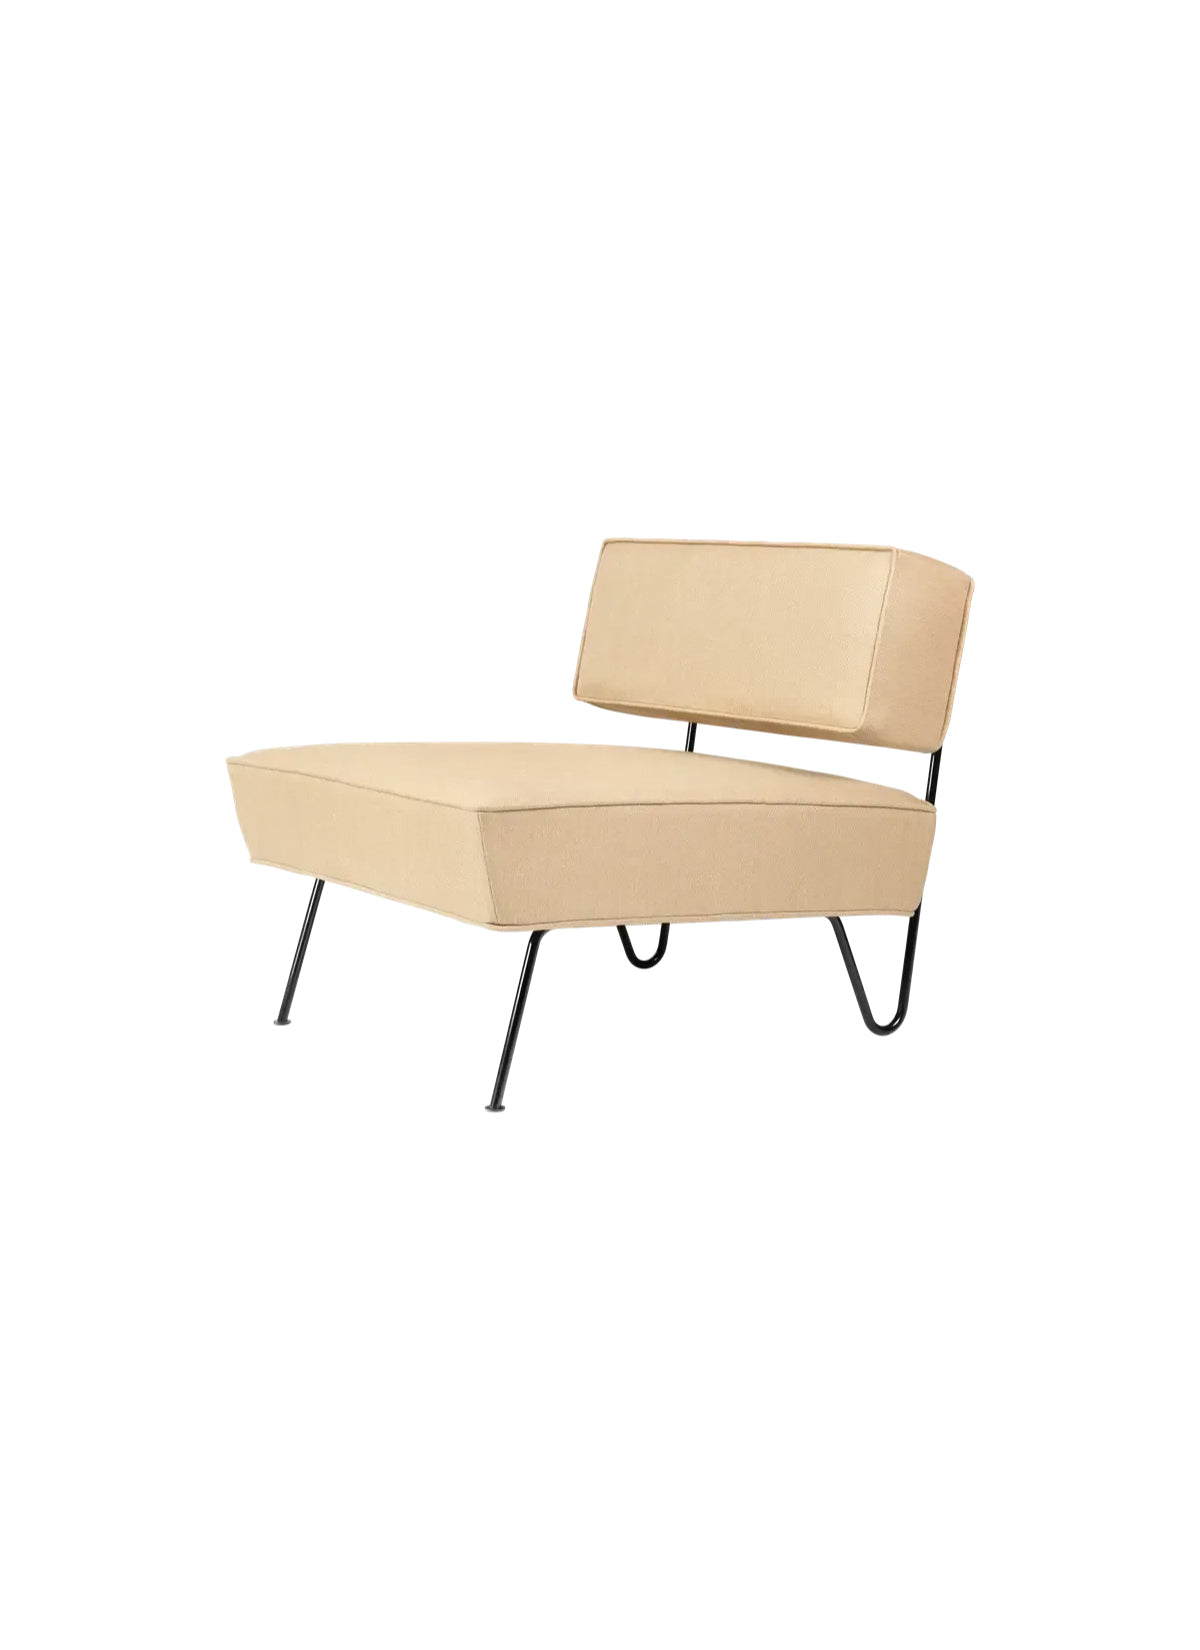 GT Lounge Chair by Gubi